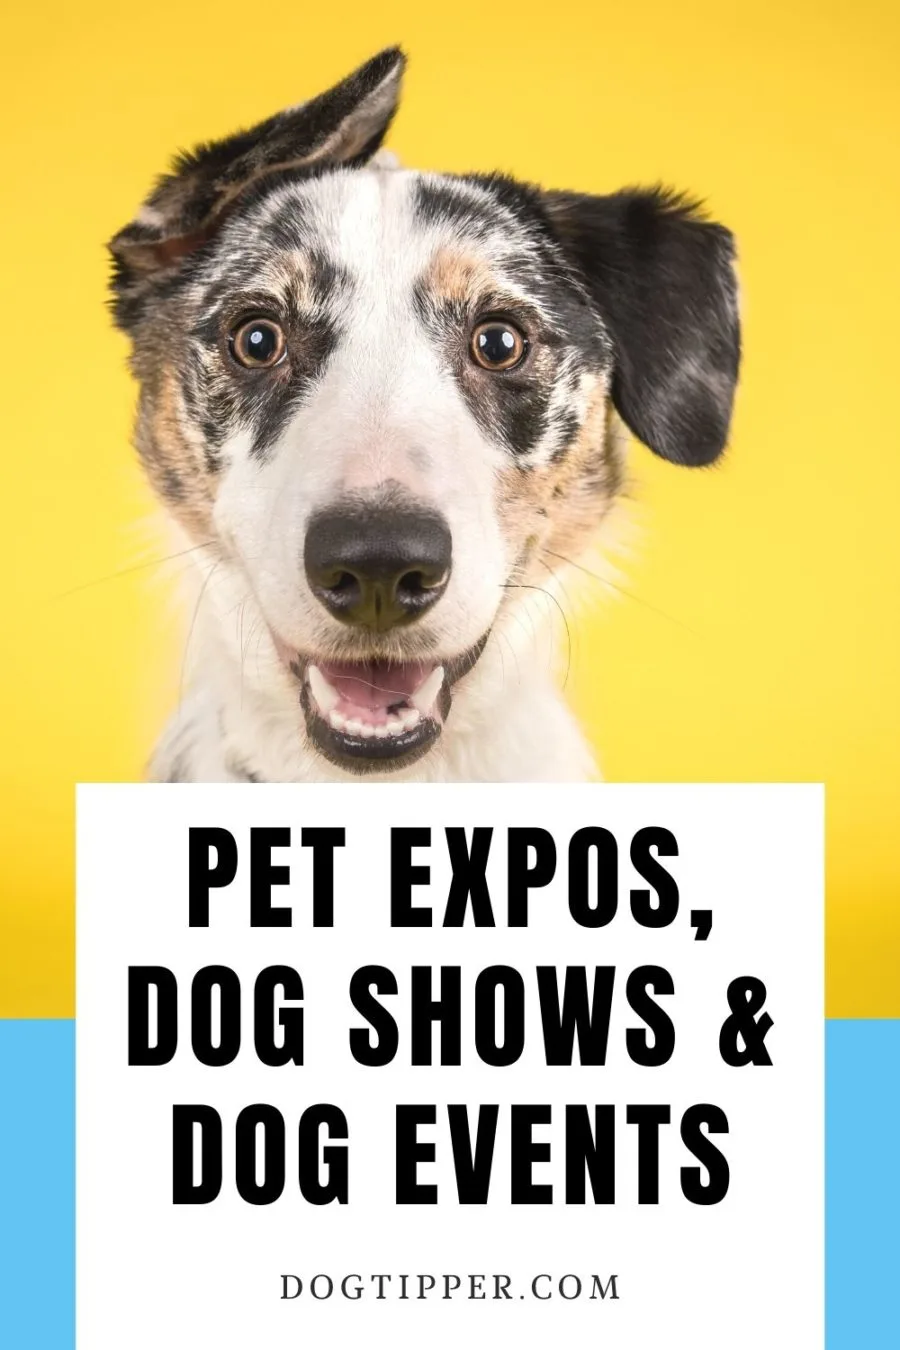 dog looking at camera with one ear folded over; pet expos, dog shows and dog events in lower portion of image